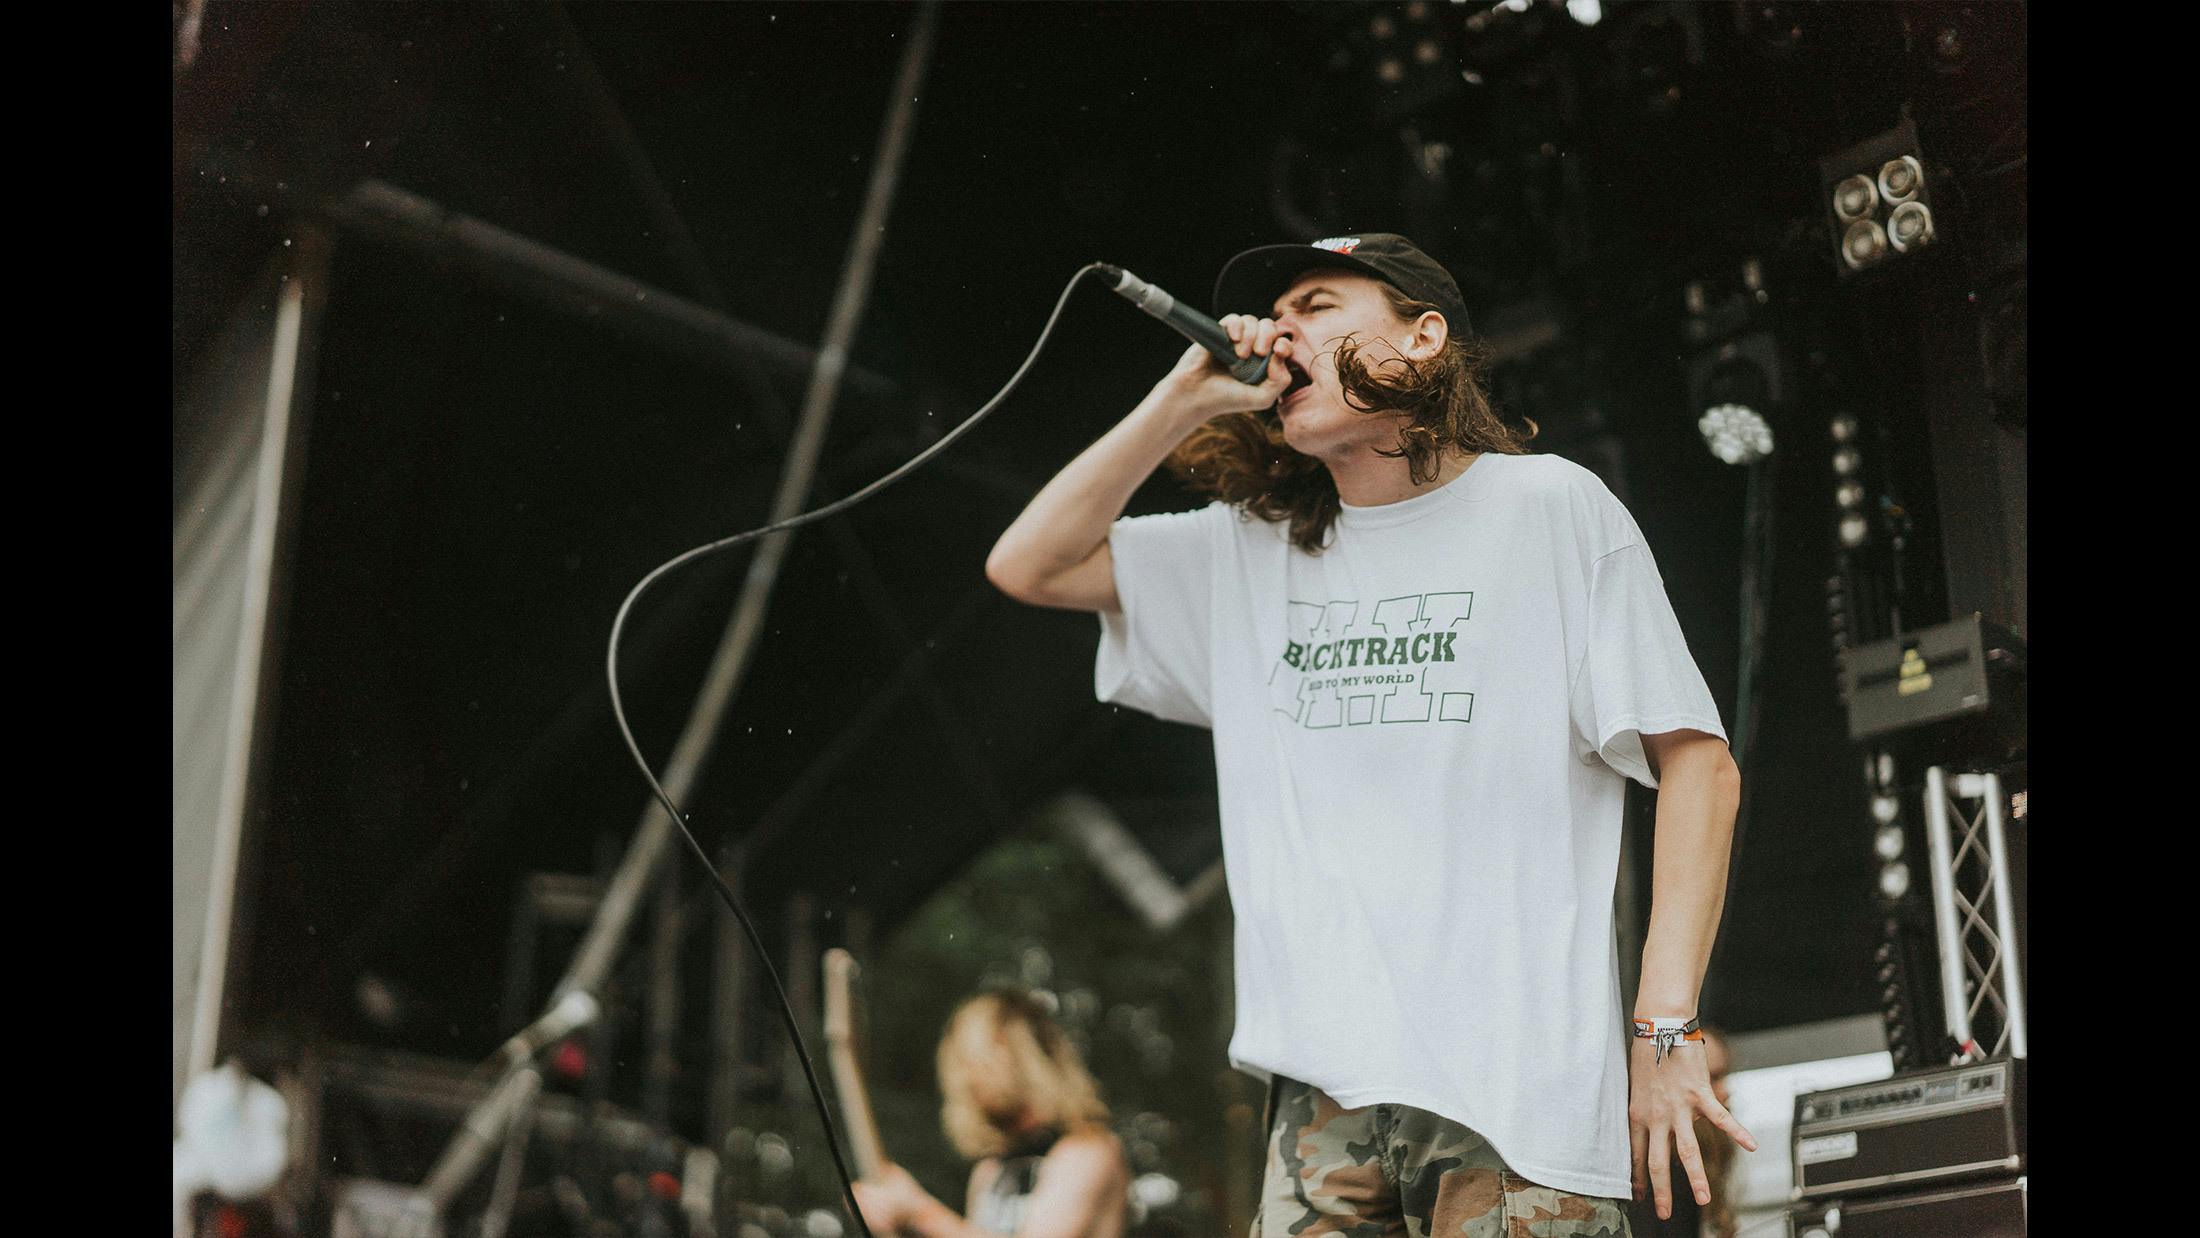 From Architects and Four Year Strong singing their praises on site, to the Oldham County mob drawing one of the most excitable crowds of the day, not a single person leaving UNIFY doesn't know Knocked Loose's name by the end of the day. Badass.